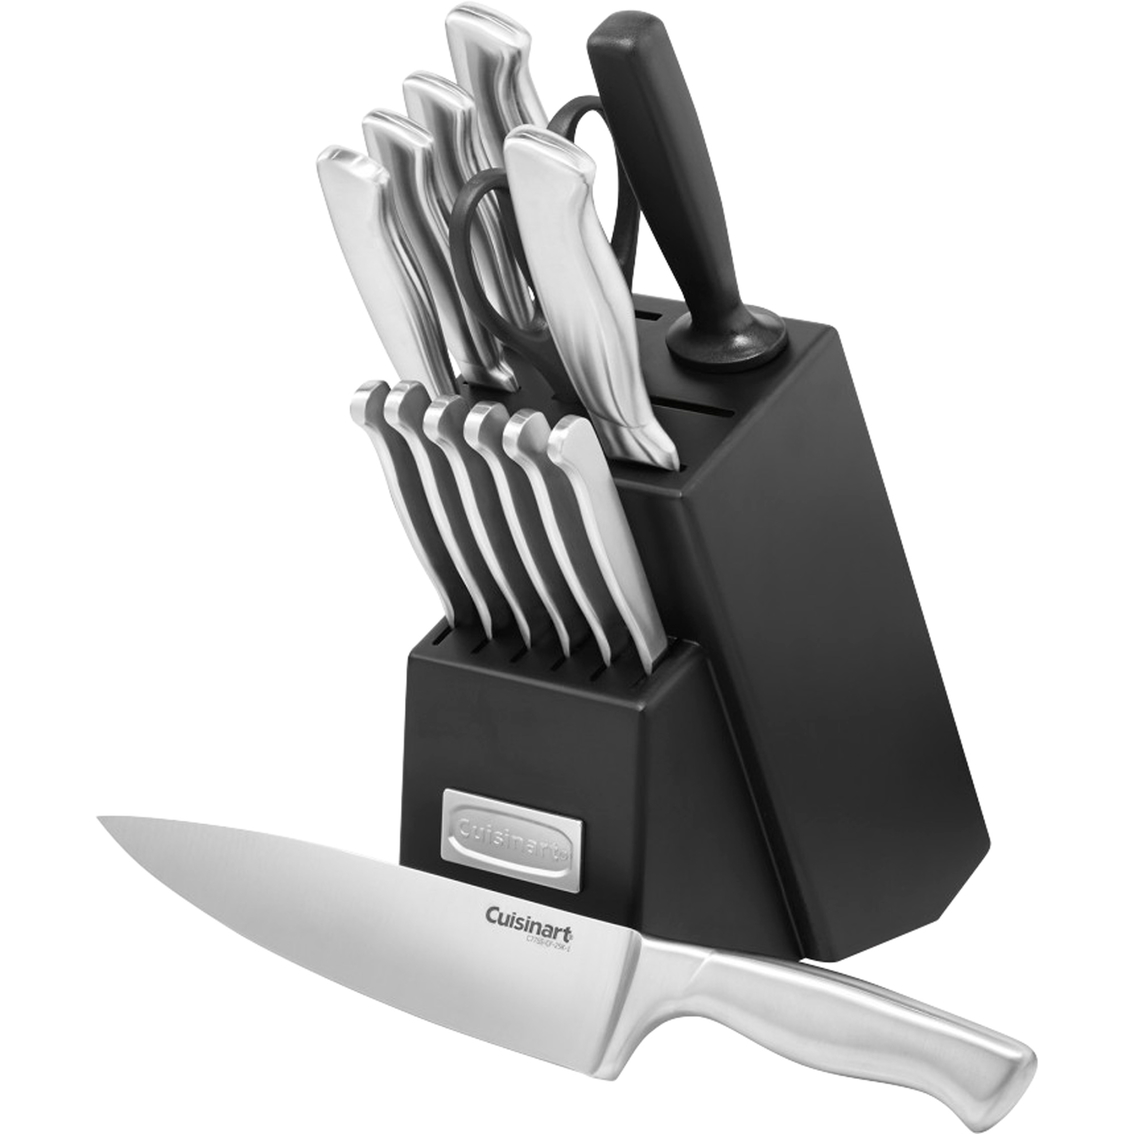 Cuisinart 15 pc. Stainless Steel Hollow Handle Cutlery Block Set